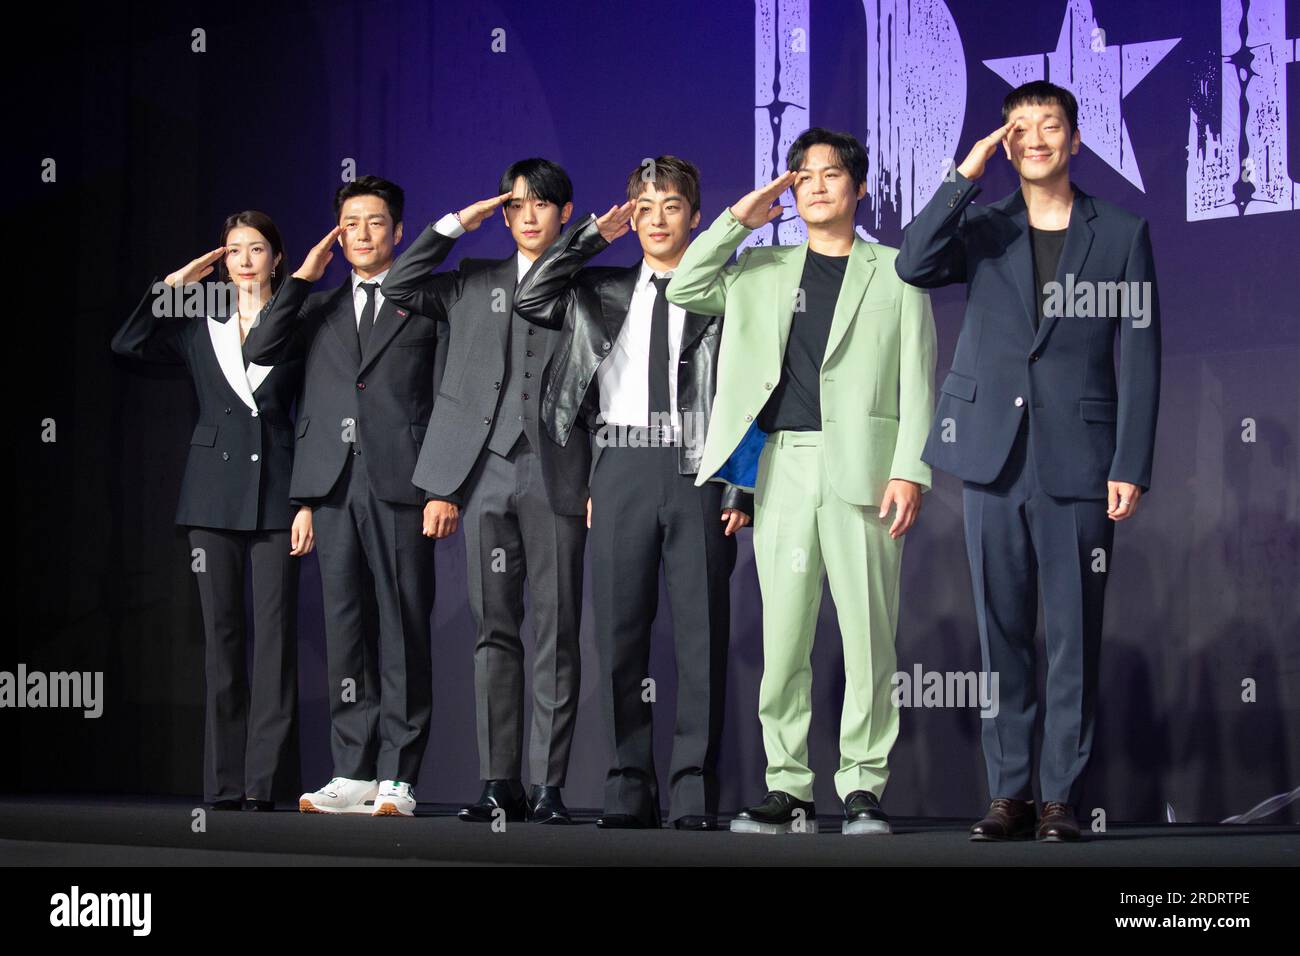 Kim Ji-Hyun, Ji Jin-Hee, Jung Hae-In, Koo Kyo-Hwan, Kim Sung-Kyun and Son Suk-Ku, July 18, 2023 : (L-R) South Korean actors Kim Ji-Hyun, Ji Jin-Hee, Jung Hae-In, Koo Kyo-Hwan, Kim Sung-Kyun and Son Suk-Ku pose during a press conference for Netflix's drama, D.P. Season 2, in Seoul, South Korea. The military drama follows the Army's Deserter Pursuit (D.P.) team and it is based on webtoon series of Kim Bo-Tong. D.P. Season 2 is going to hit the platform on July 28. Credit: Lee Jae-Won/AFLO/Alamy Live News Stock Photo